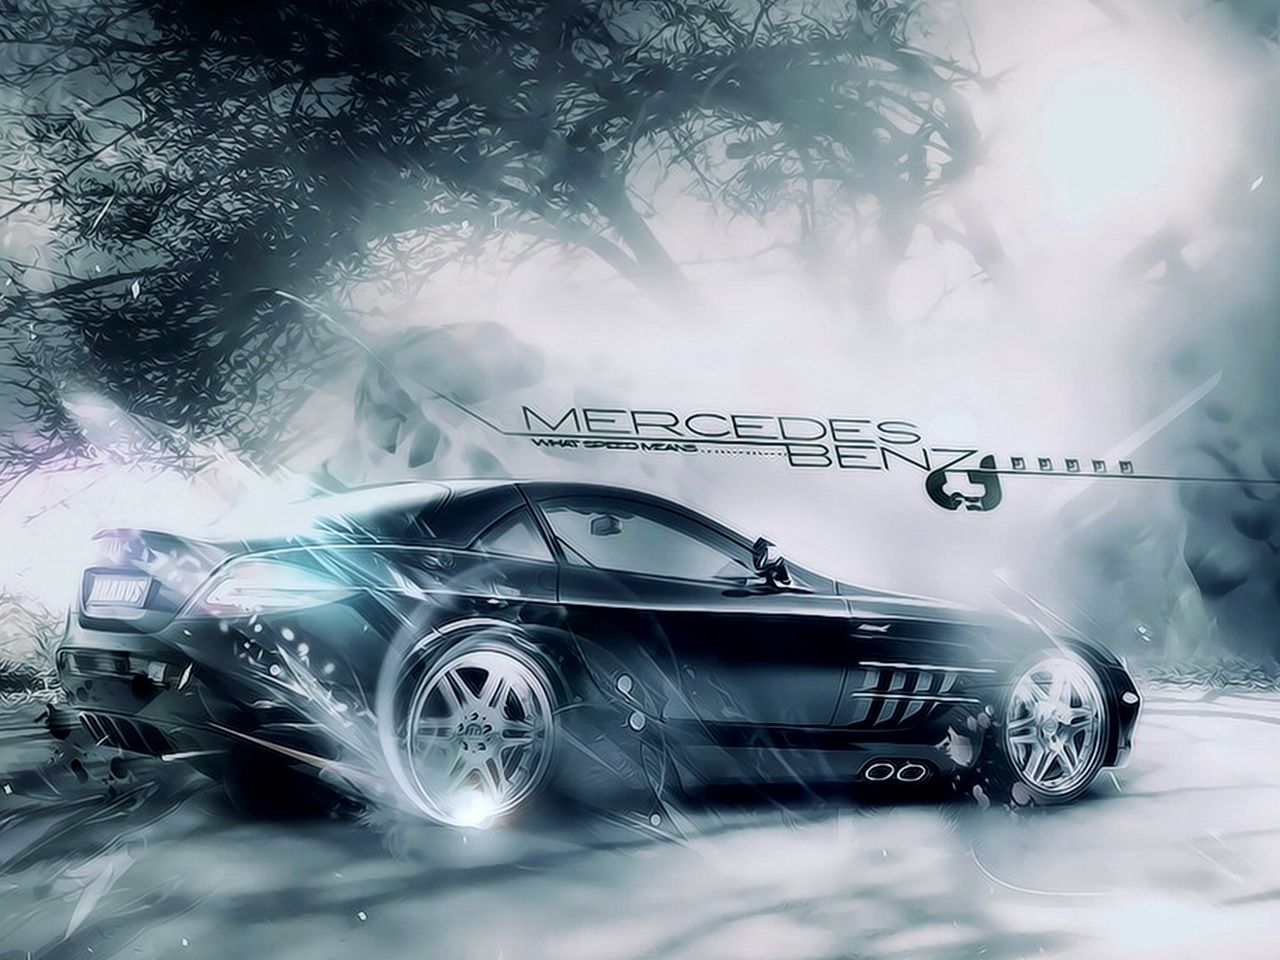 Black Cars Hot And Stylish HD Wallpaper Collection